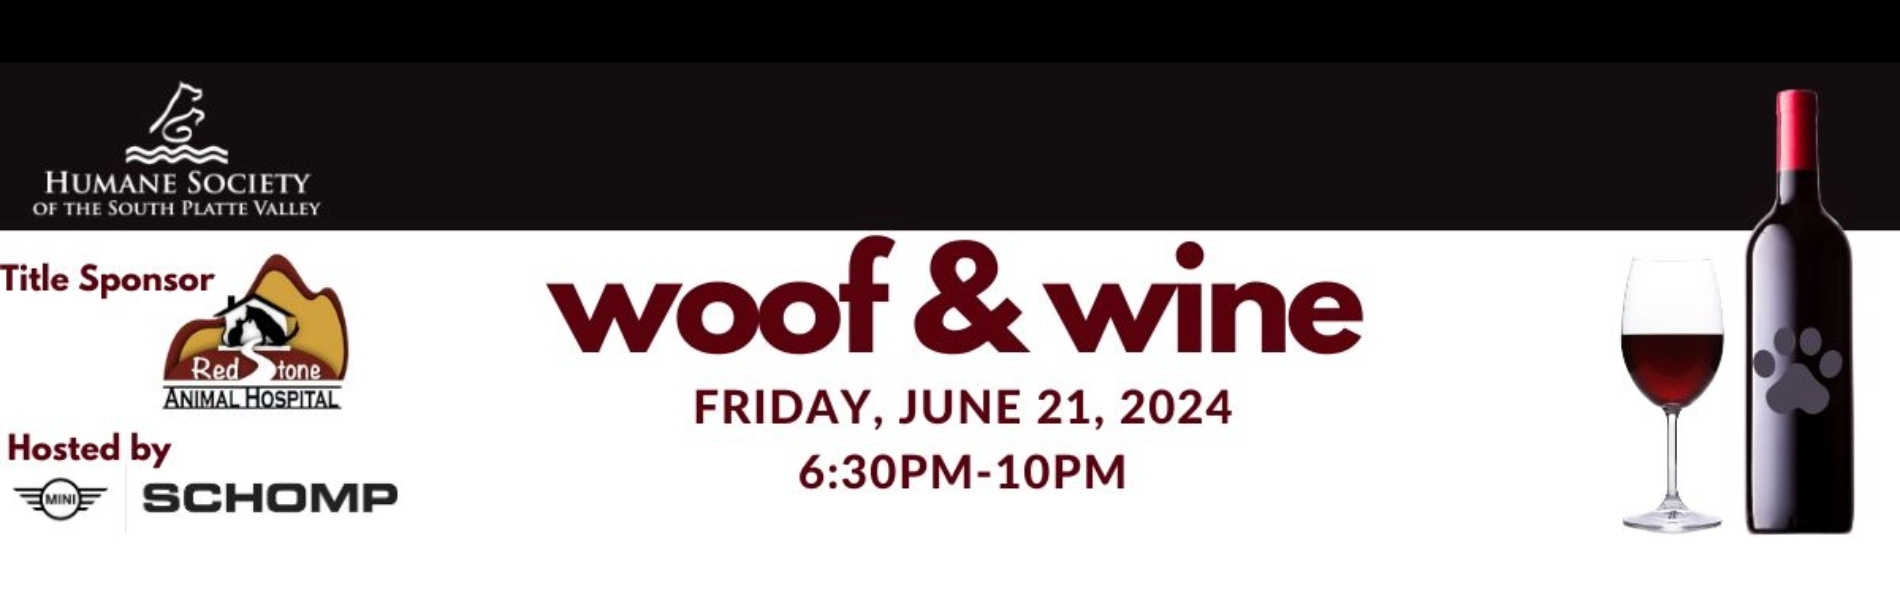 Woof & Wine | The Humane Society of the South Platte Valley (HSSPV)